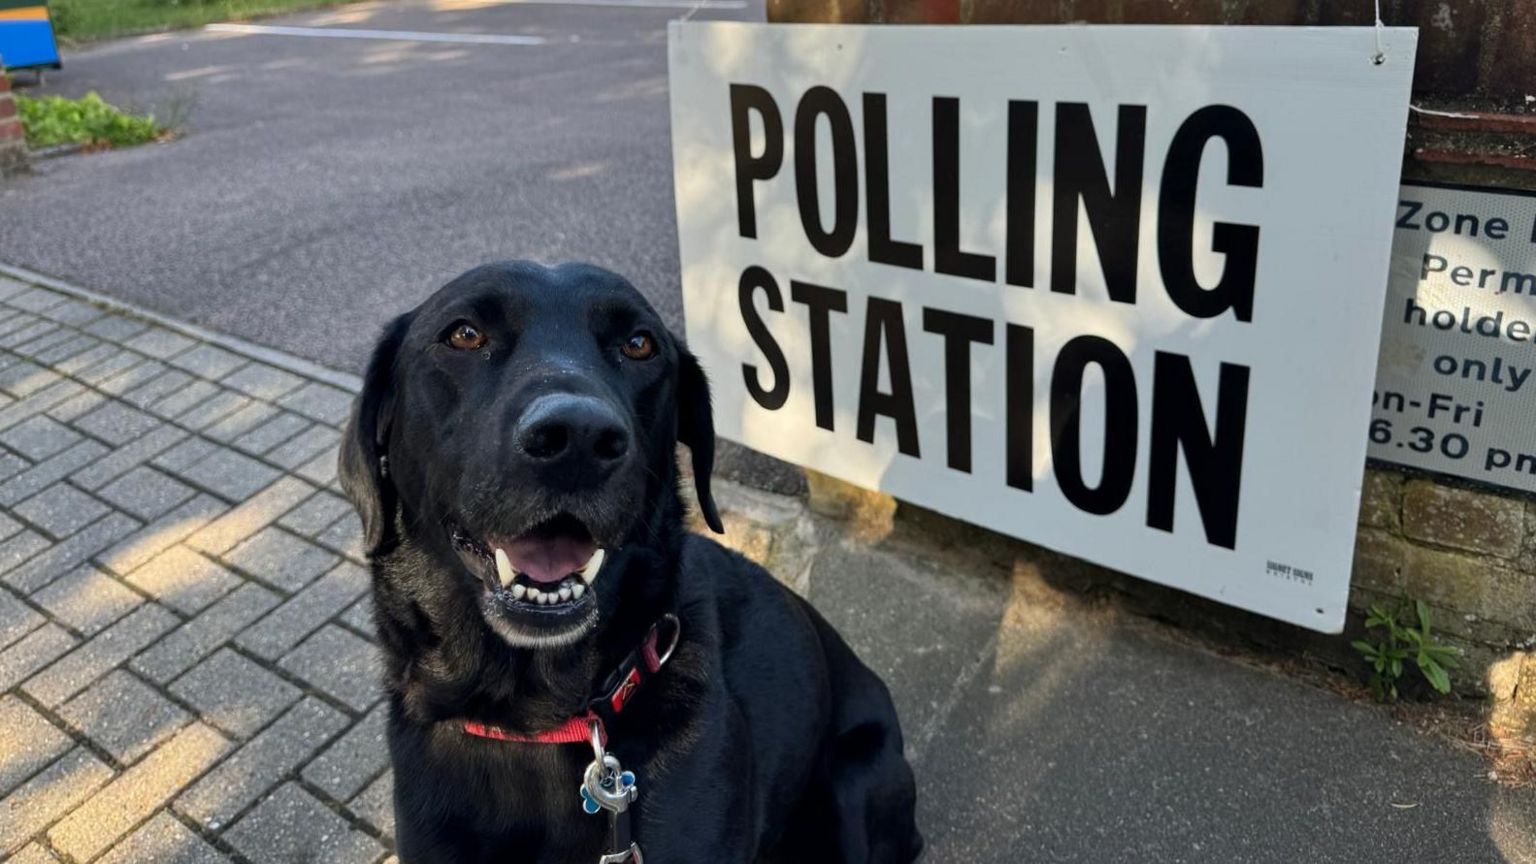 A black dog sits by a polling station sign